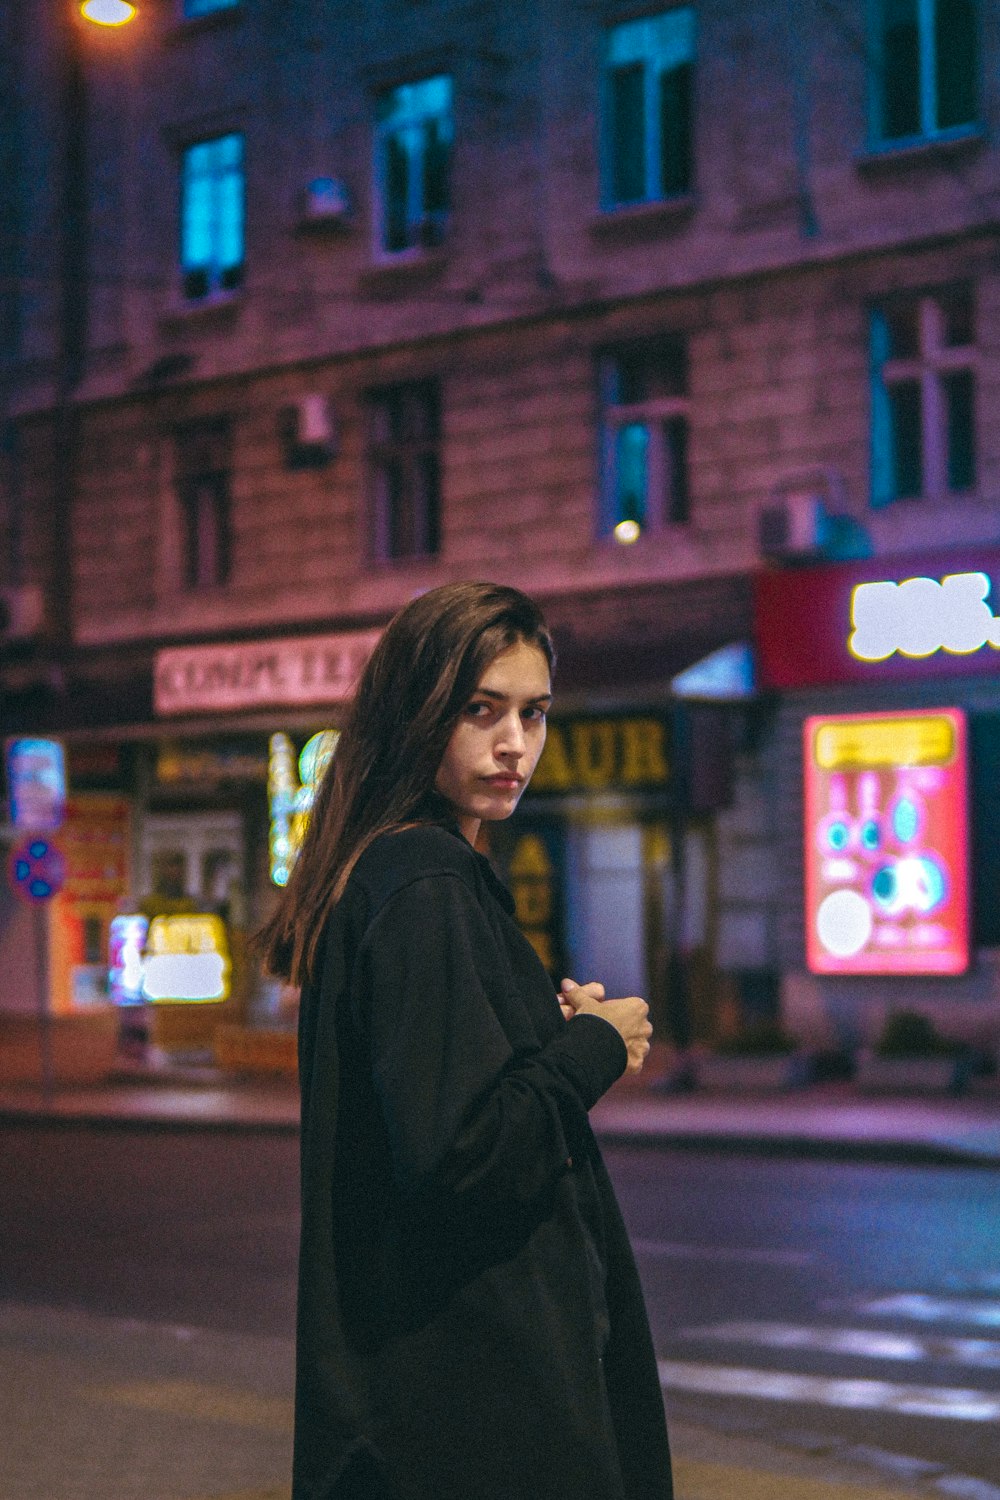 woman in black coat standing near red building during night time